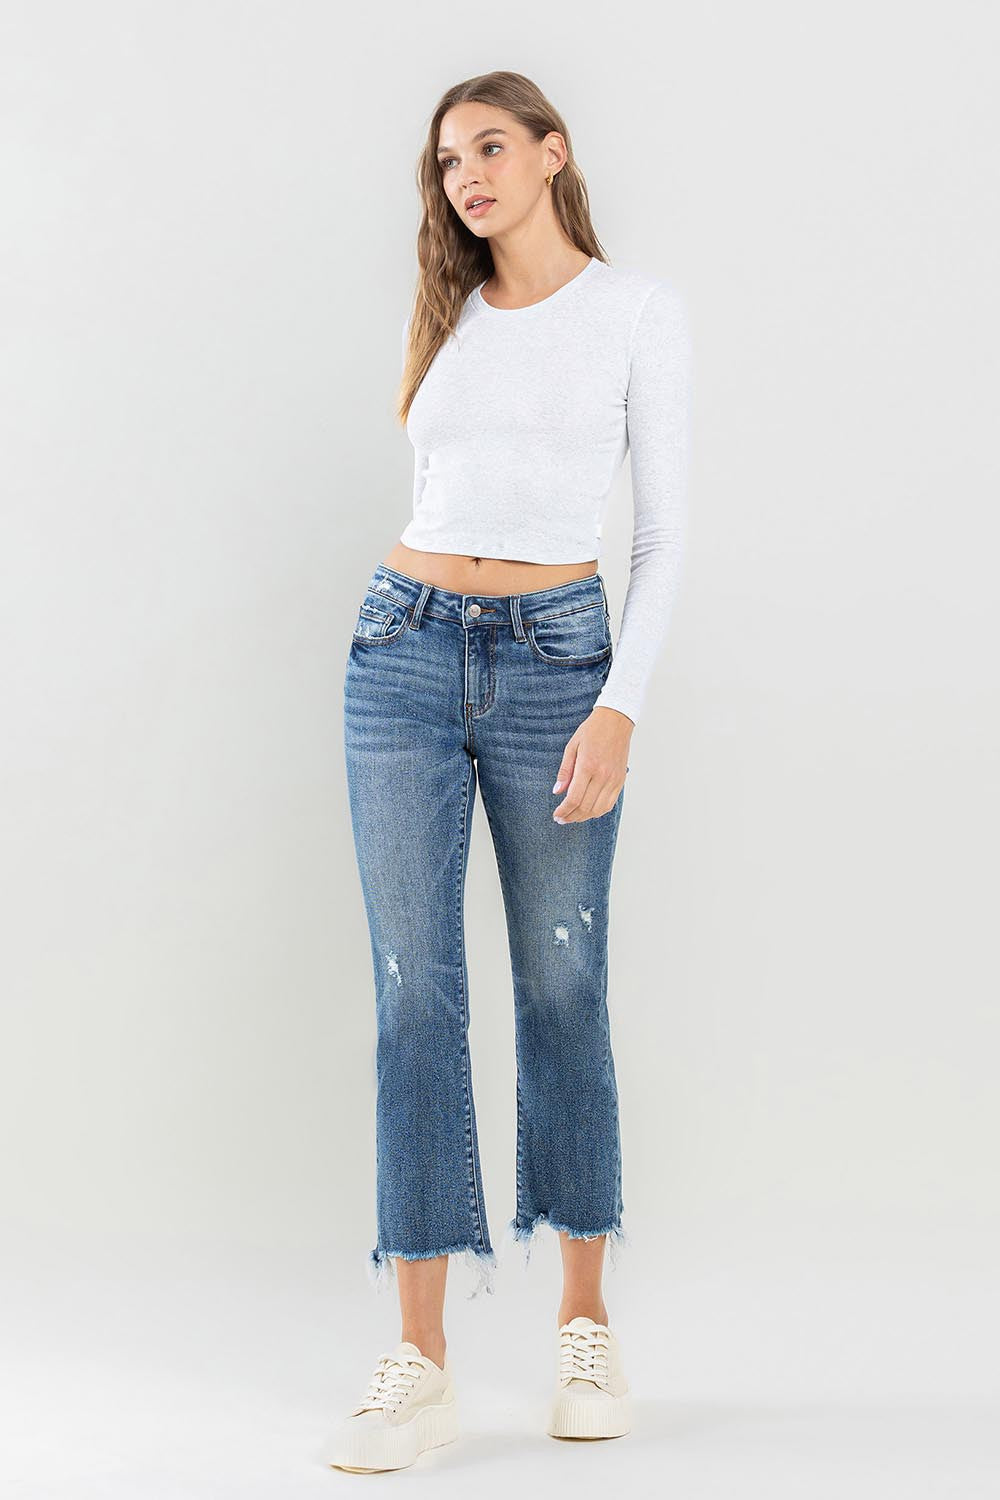 These mid rise frayed hem jeans are the perfect addition to any casual outfit. The frayed hem adds a trendy and edgy touch to the classic mid rise style. Made with high-quality denim, these jeans are both comfortable and durable. The mid rise waistline offers a flattering fit for all body types.